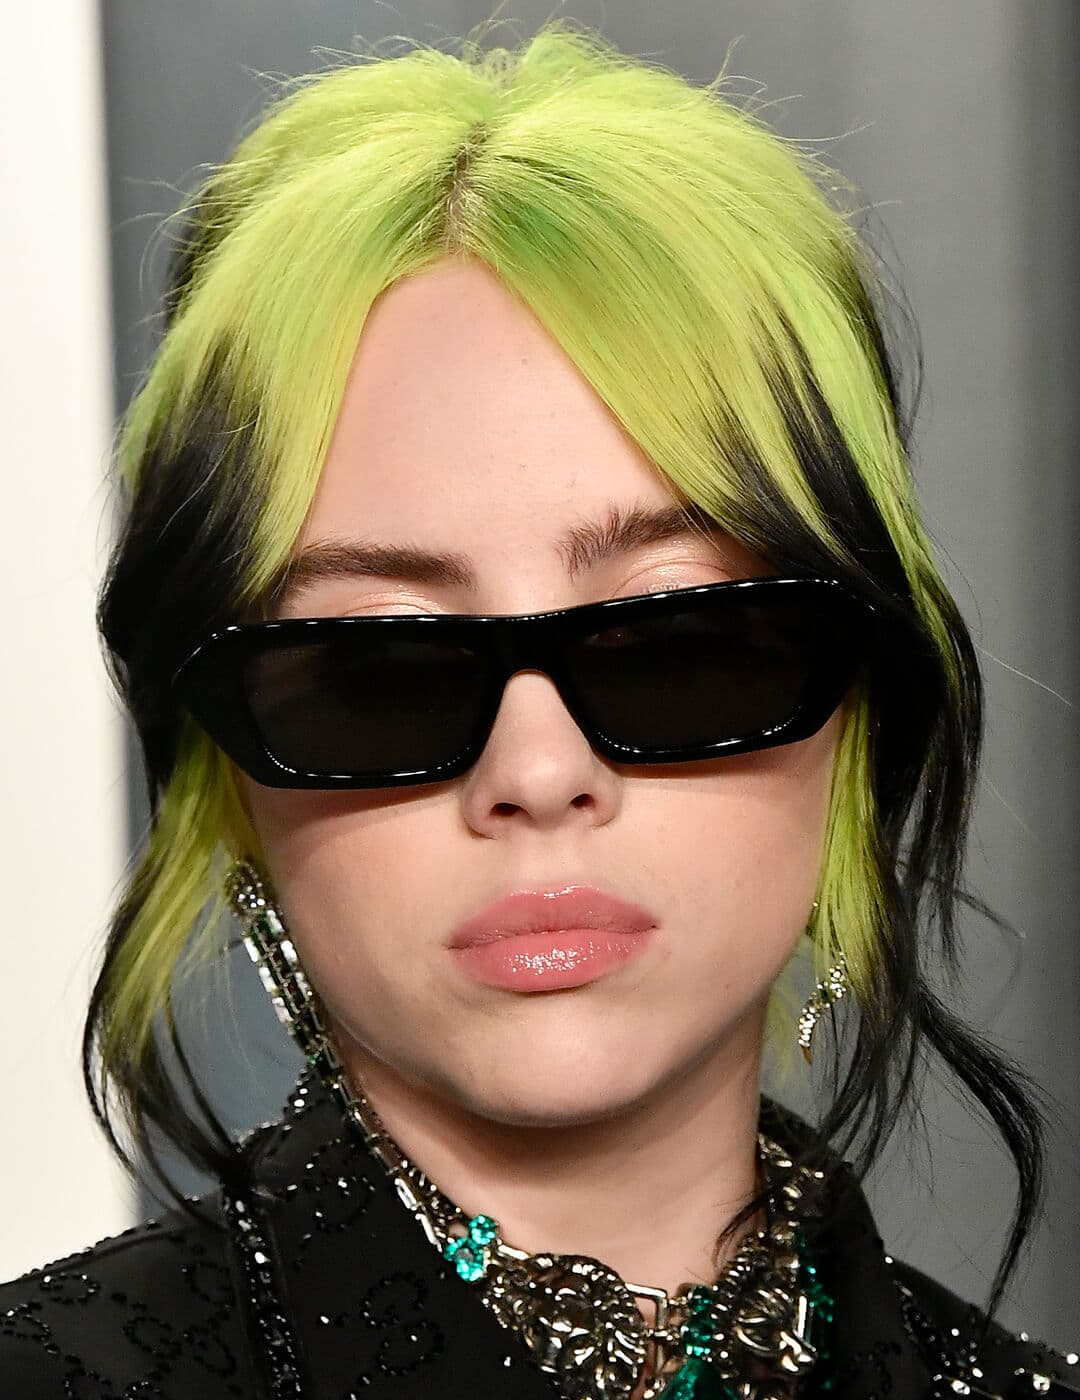 A photo of Billie Eilish with her iconic green skunk hair